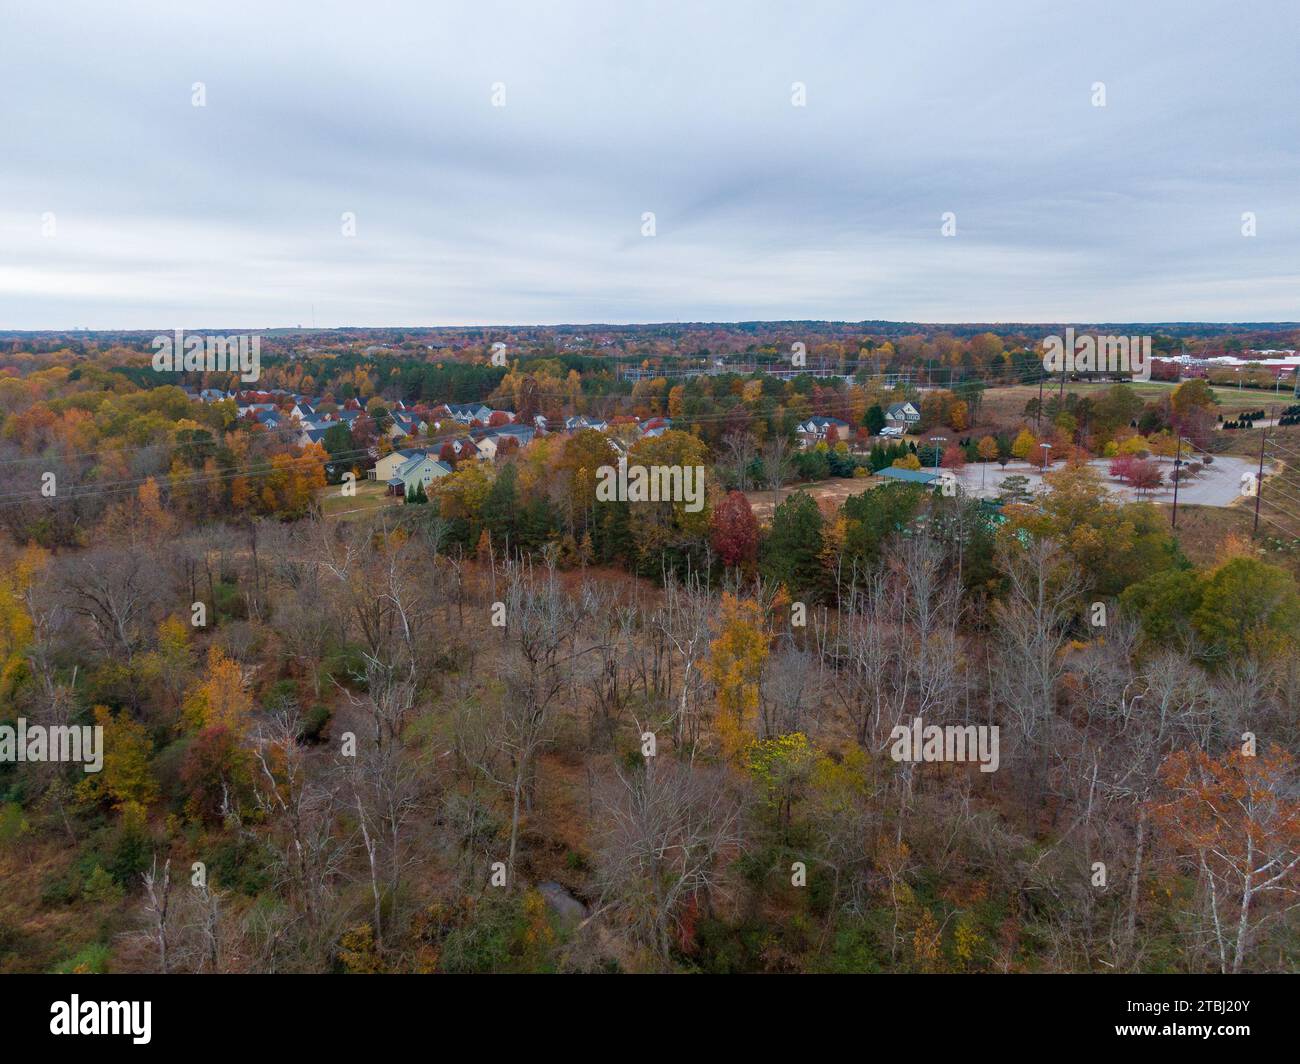 Drone photos of an apartment complex showing beautiful fall colors. Stock Photo